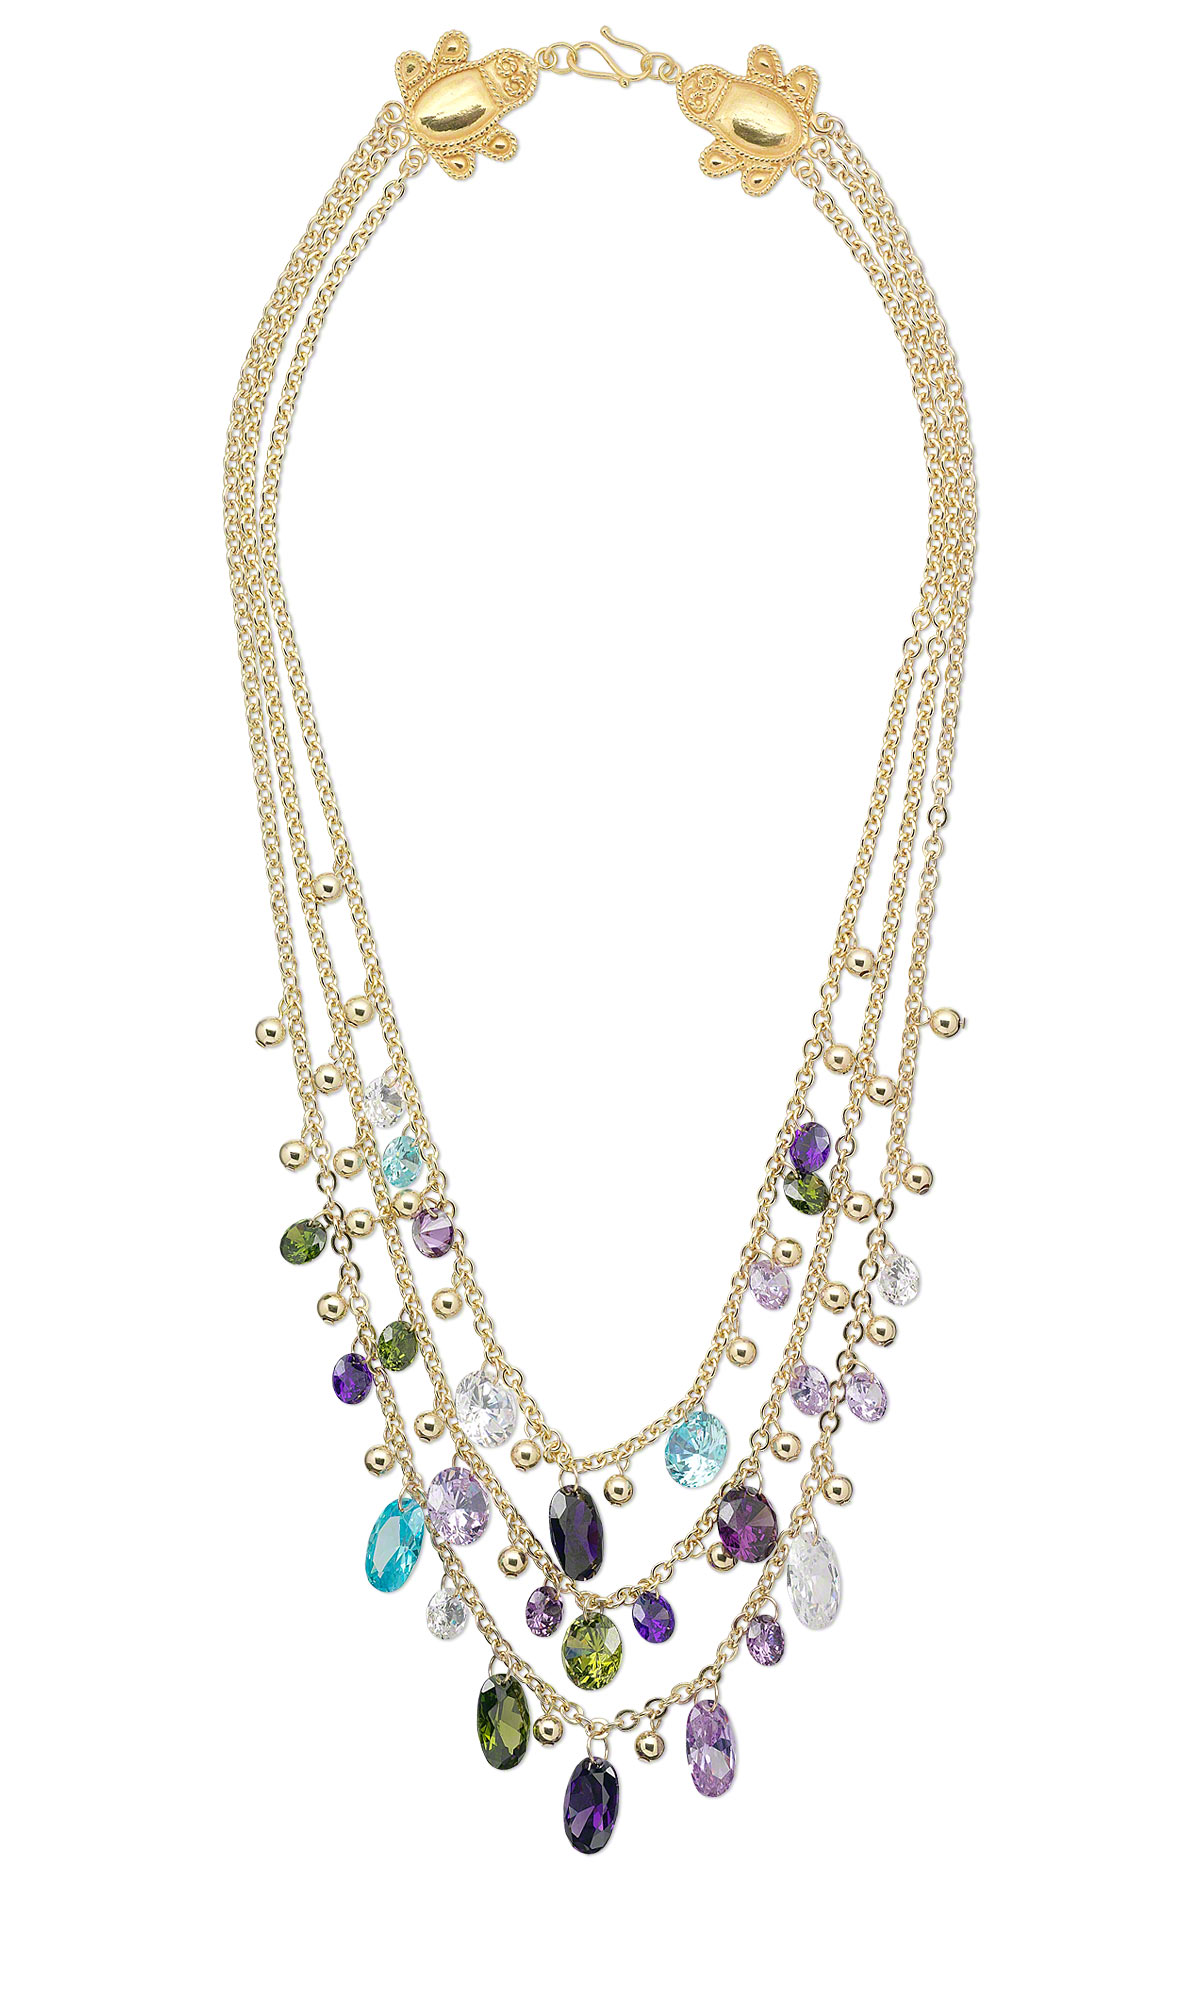 Jewelry Design - Triple-Strand Necklace with Assorted Cubic Zirconia ...